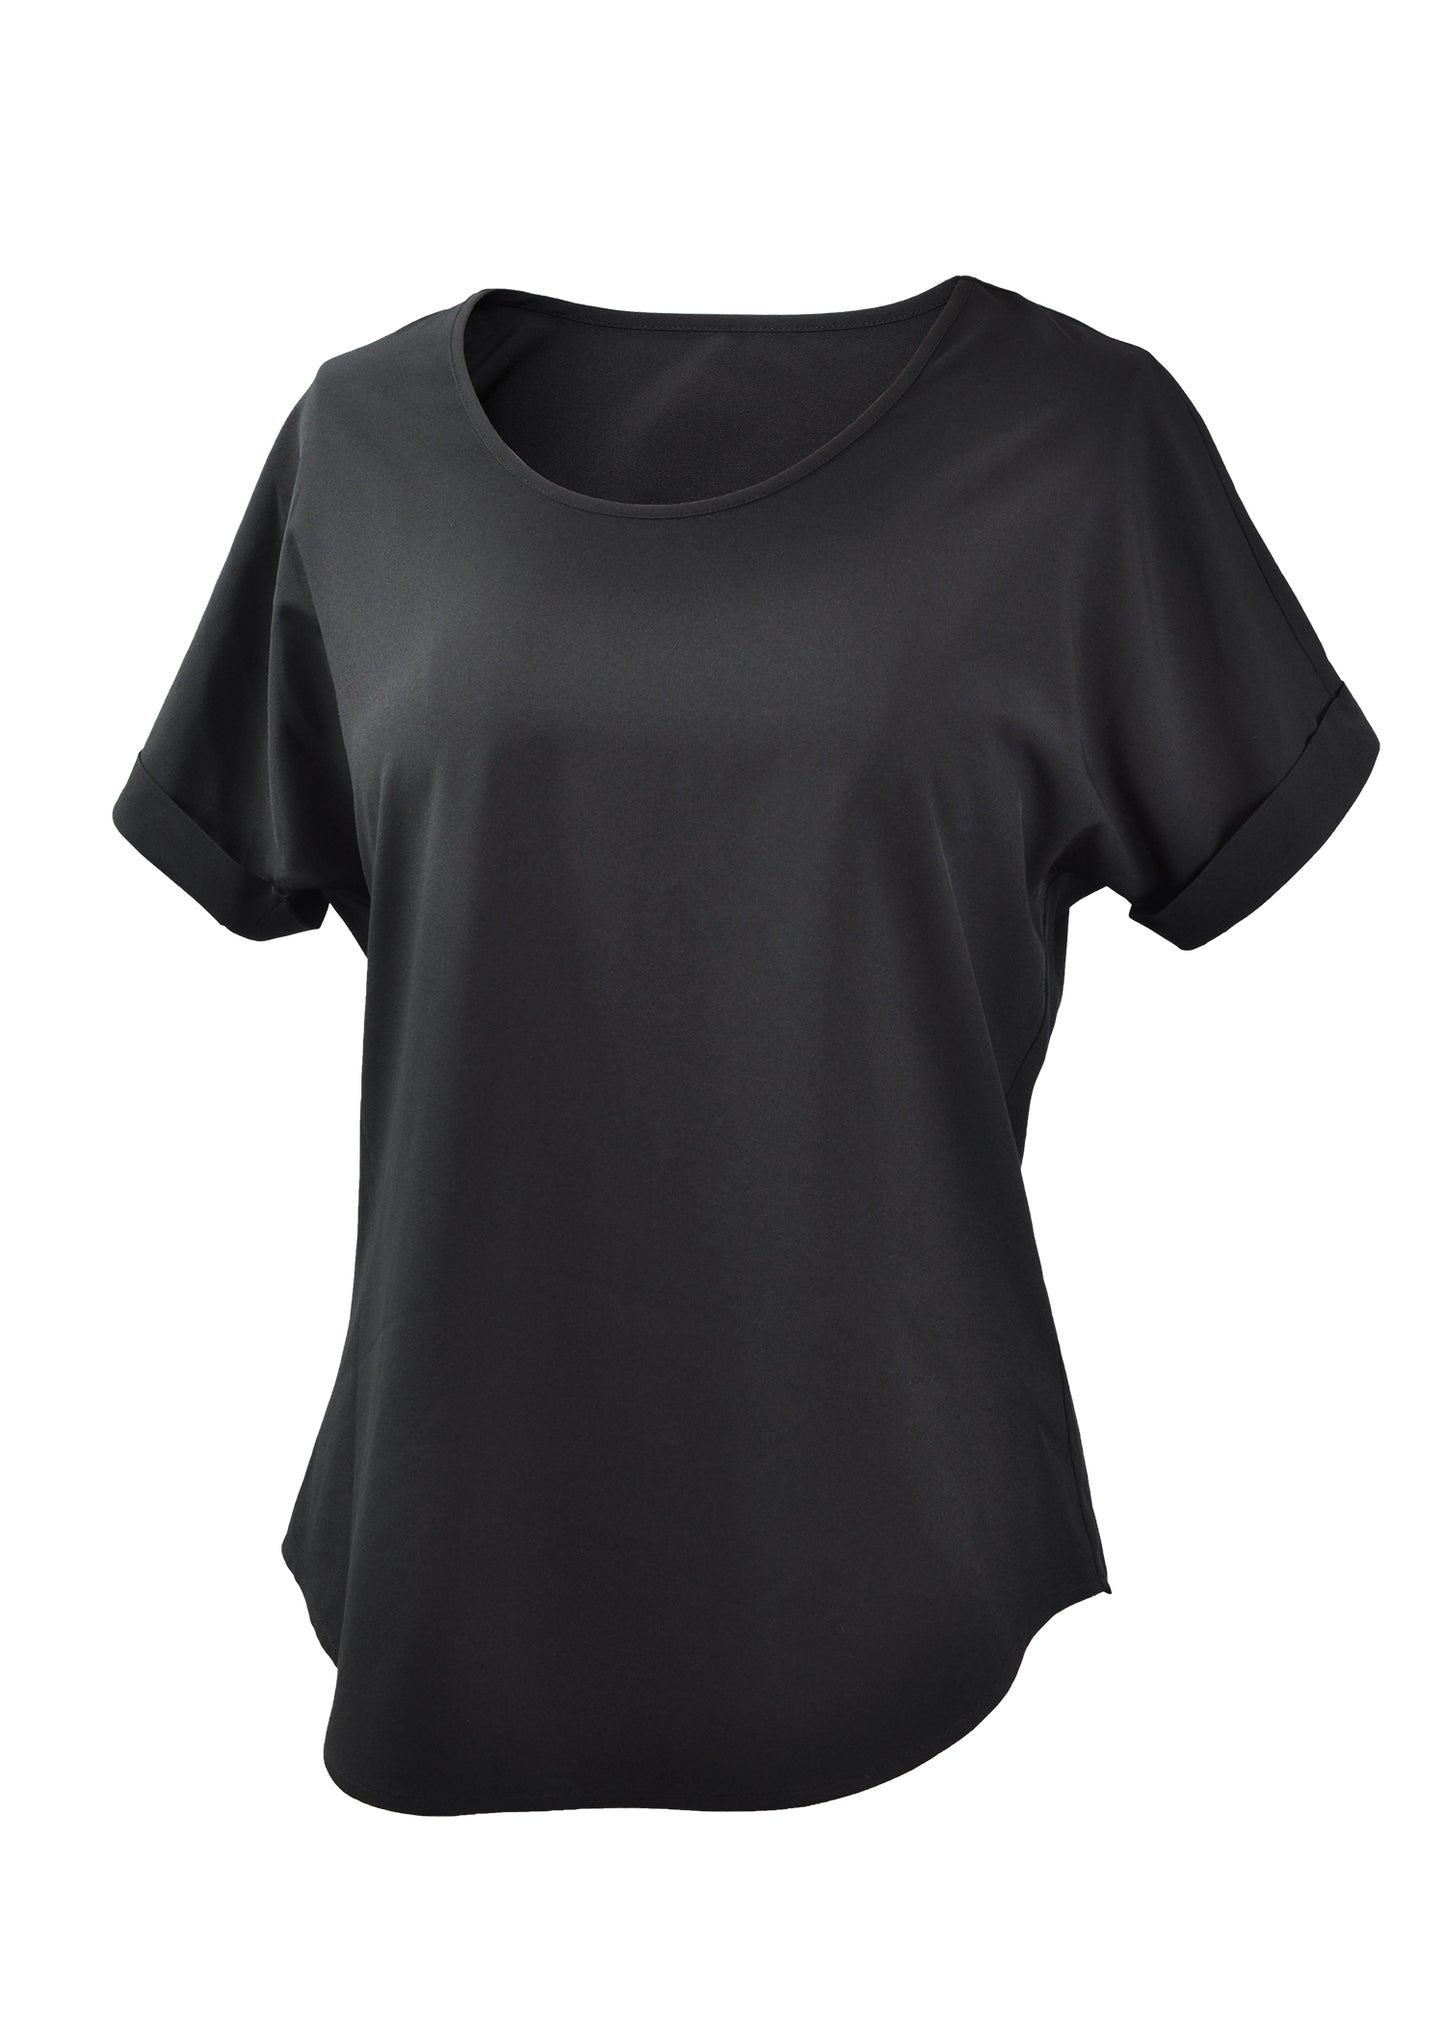 Young USA Ladies Fashion Blouse in Front - Black